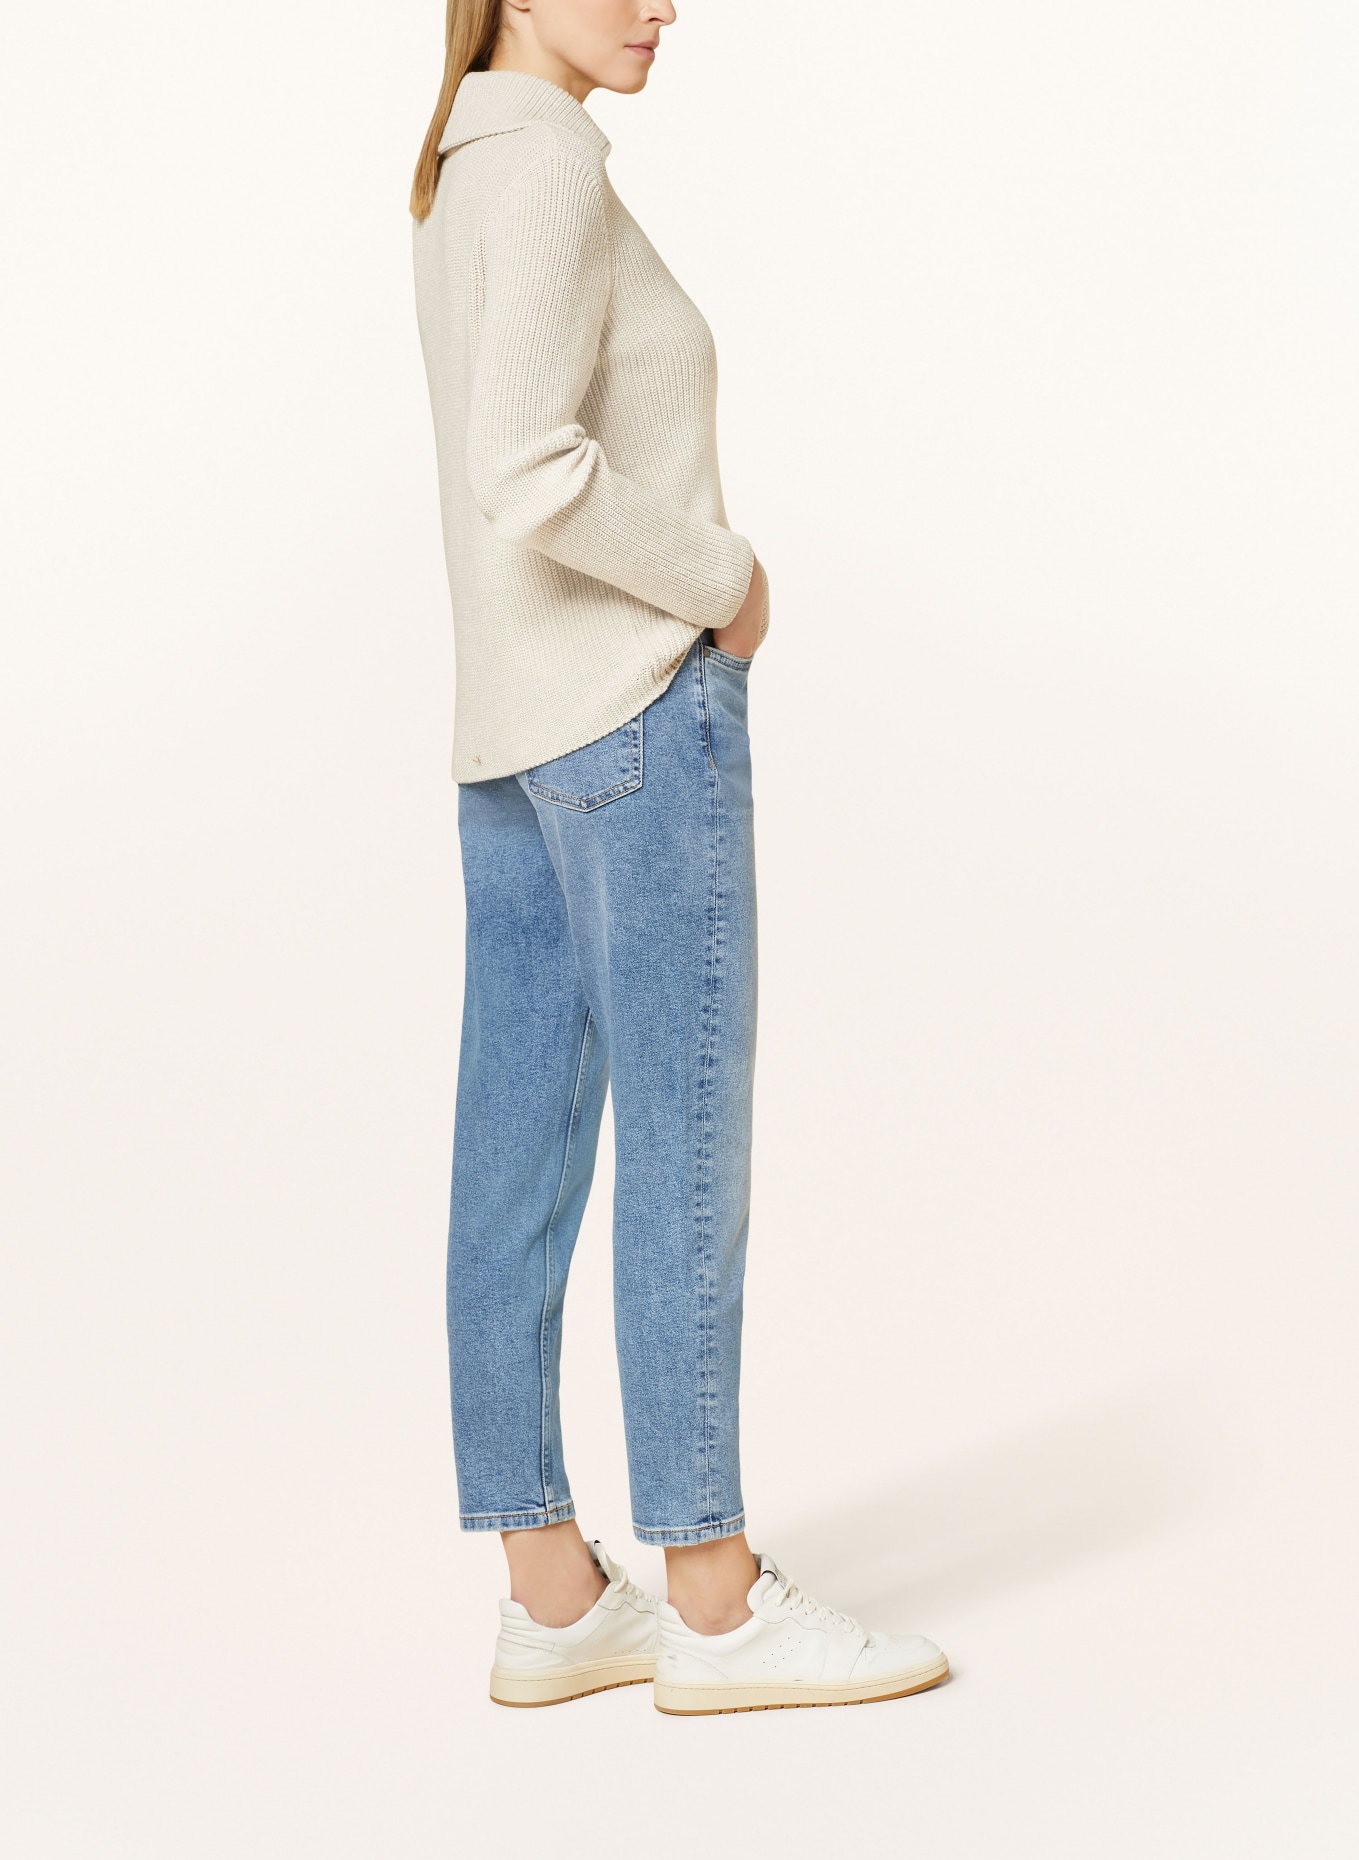 Marc O'Polo 7/8 jeans MALA, Color: 037 Mid authentic wash with grindi (Image 4)